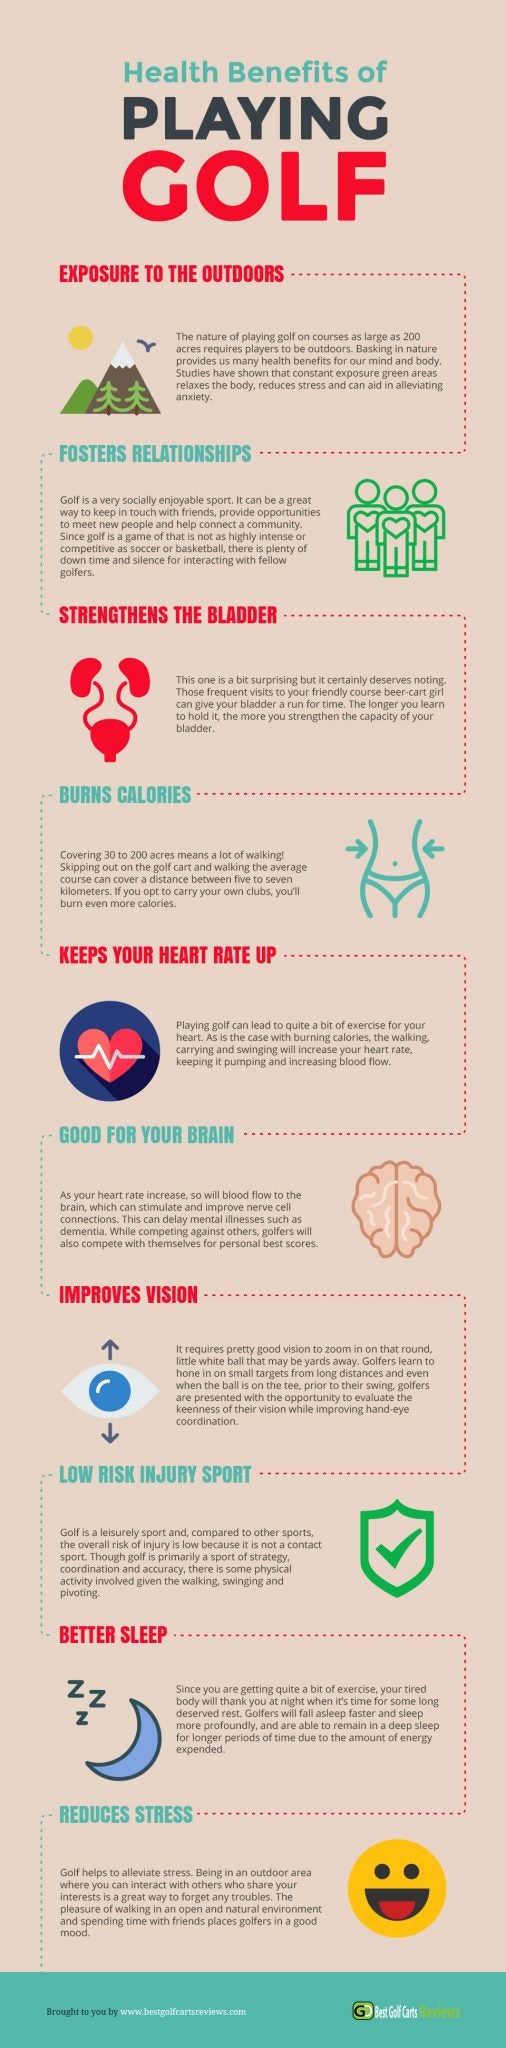 Health Benefits of Playing Golf